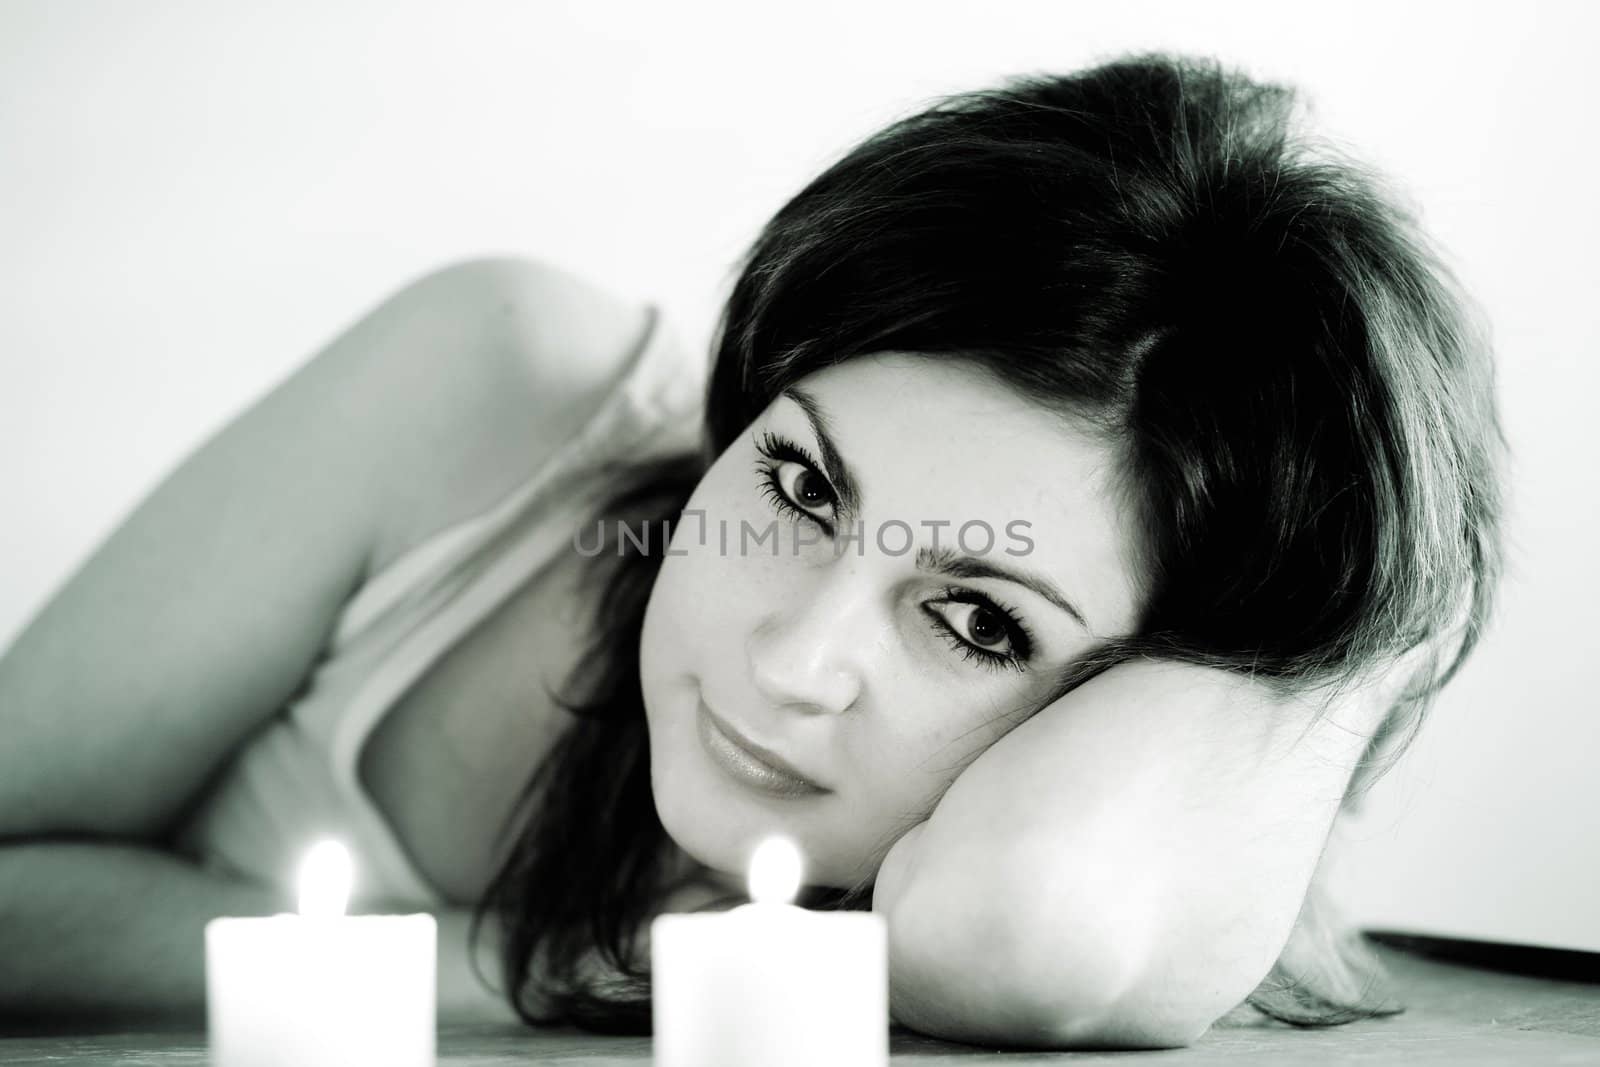 An image of nice girl with two candles